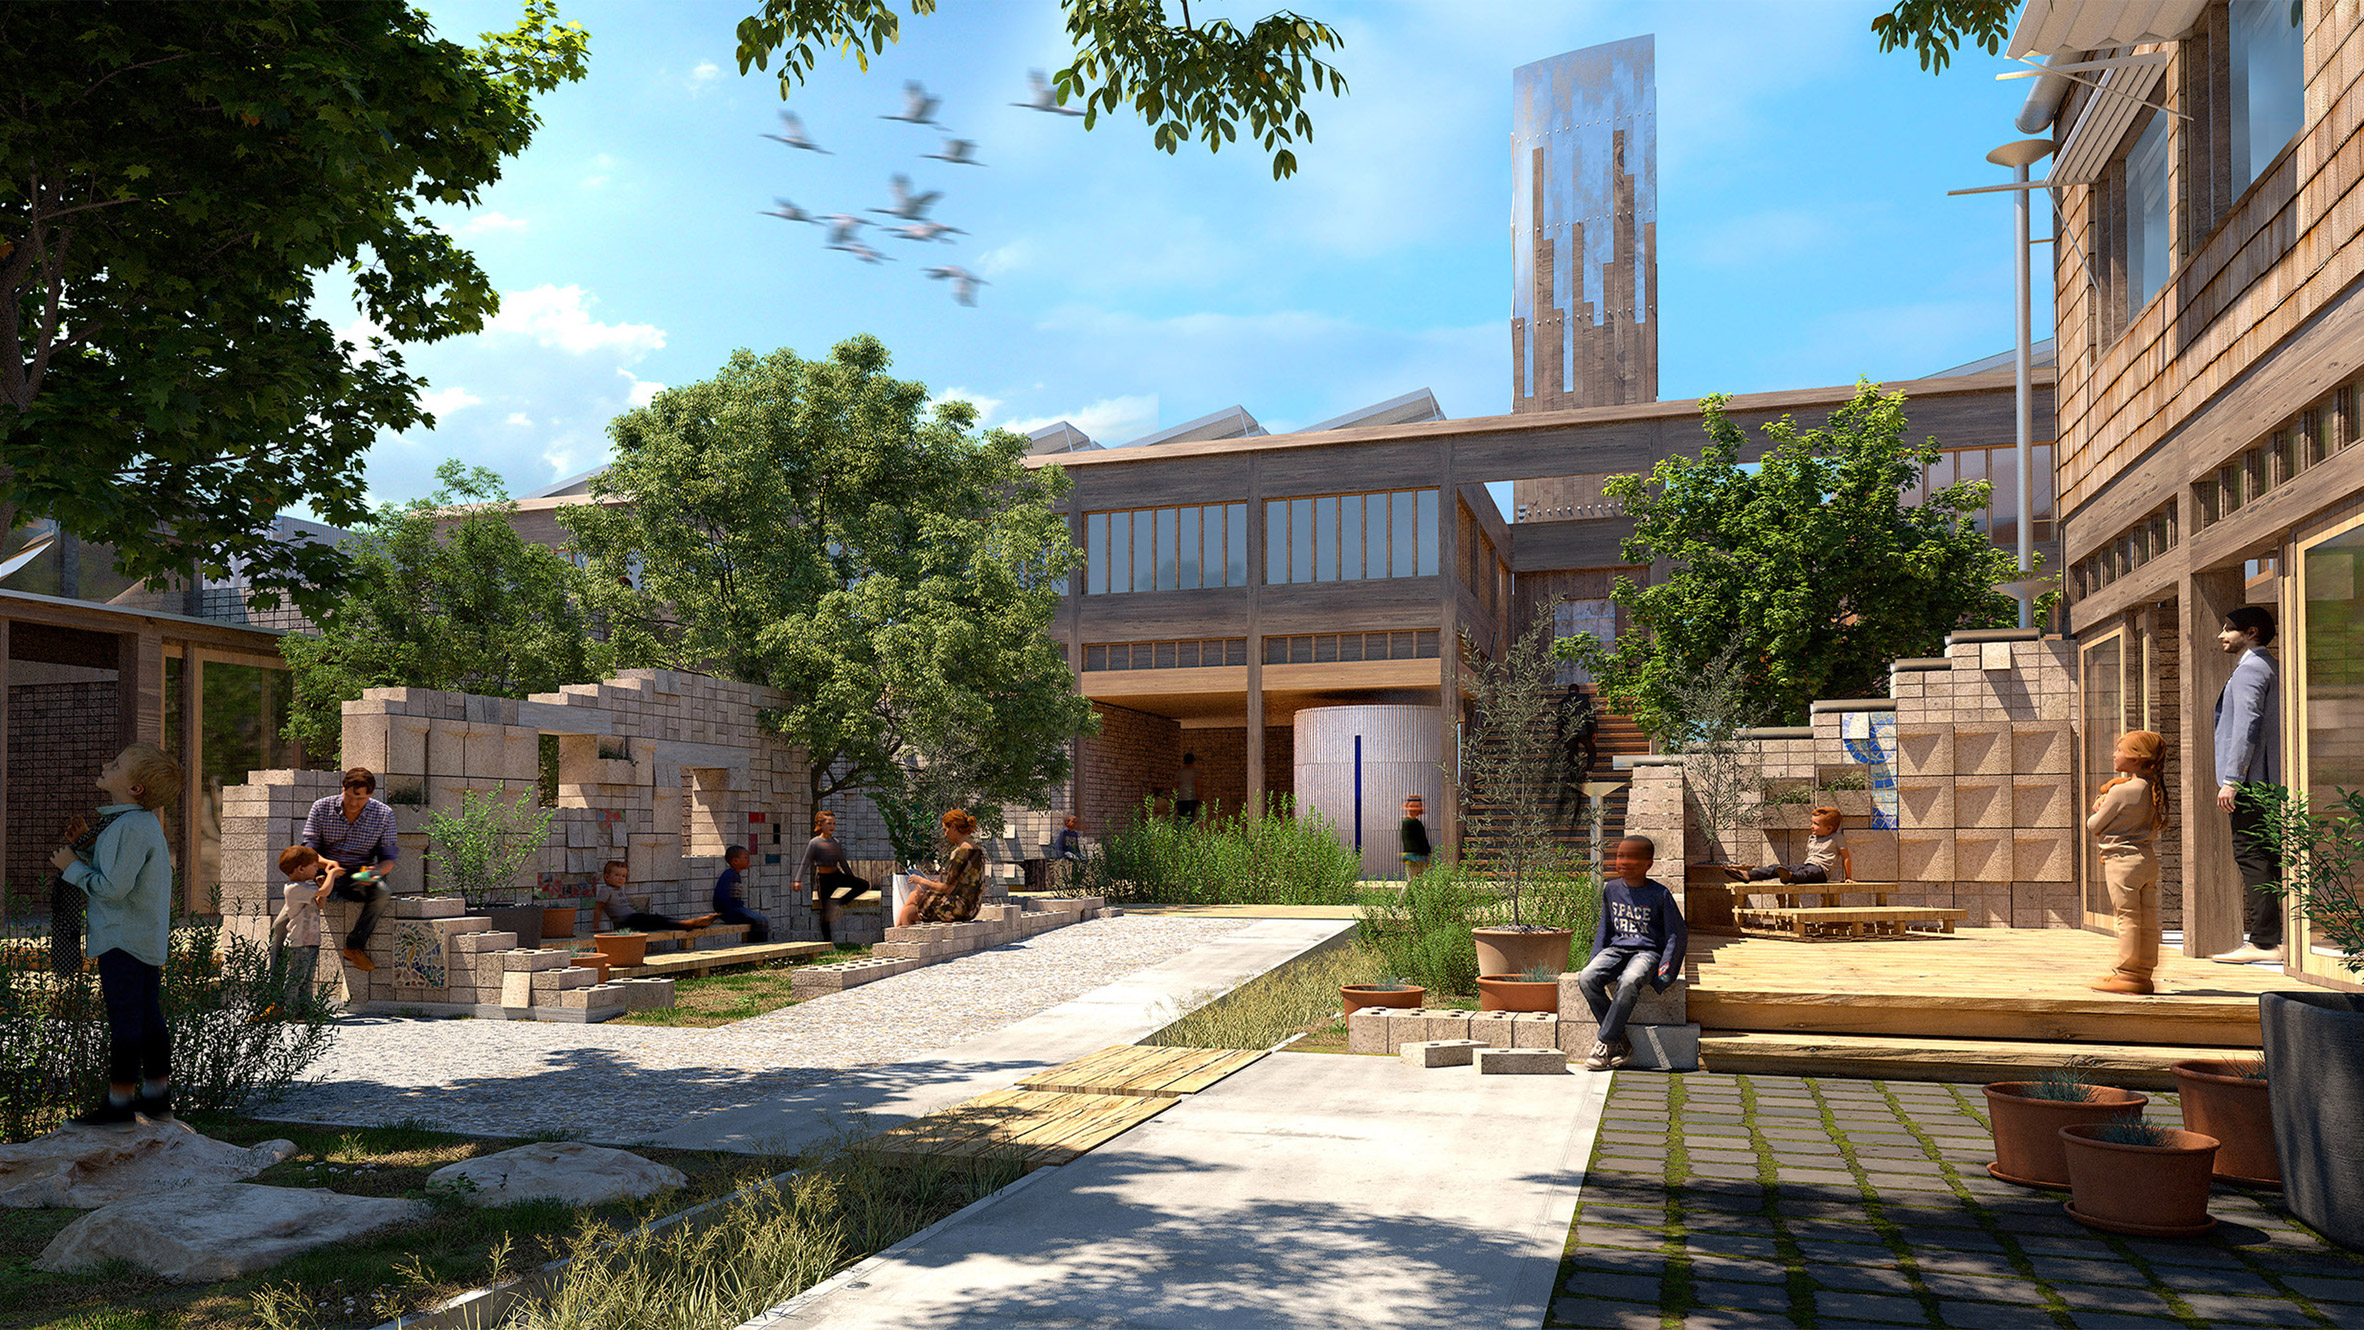 Render of a paved outdoor space with surrounding buildings by a student at Drexel University